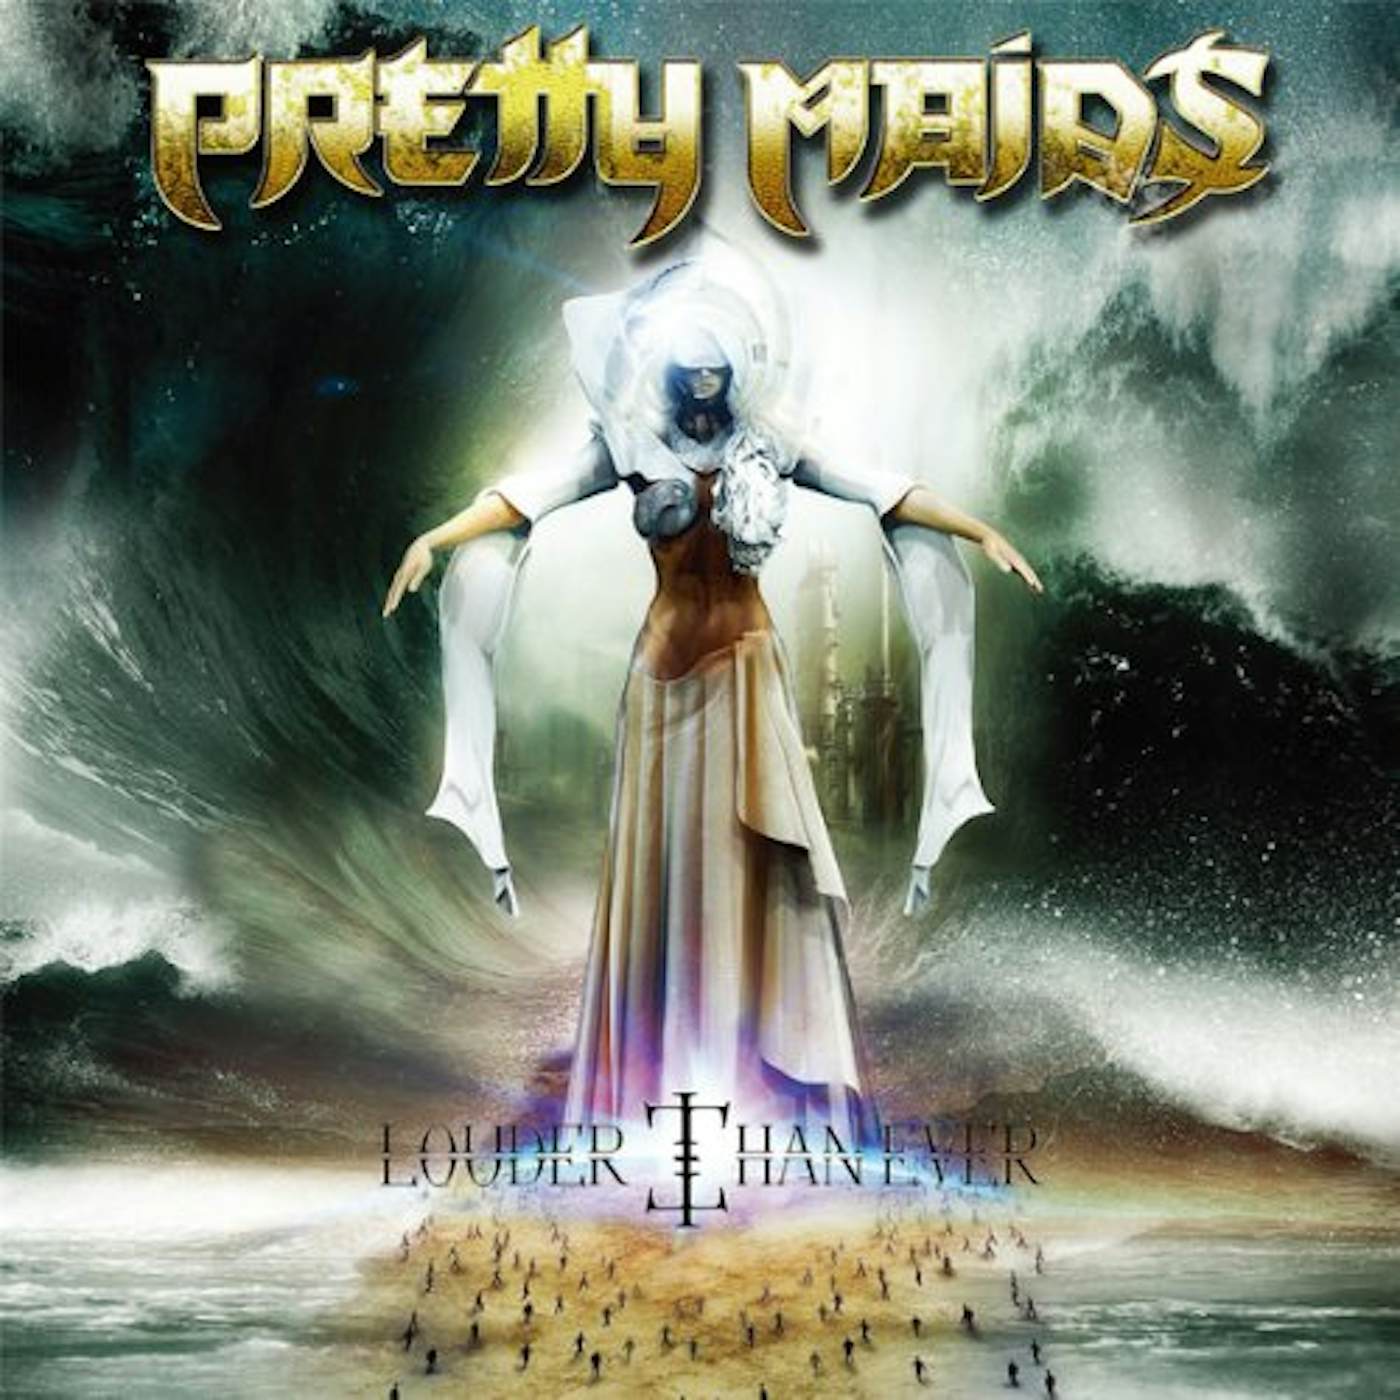 Pretty Maids LOUDER THAN EVER CD